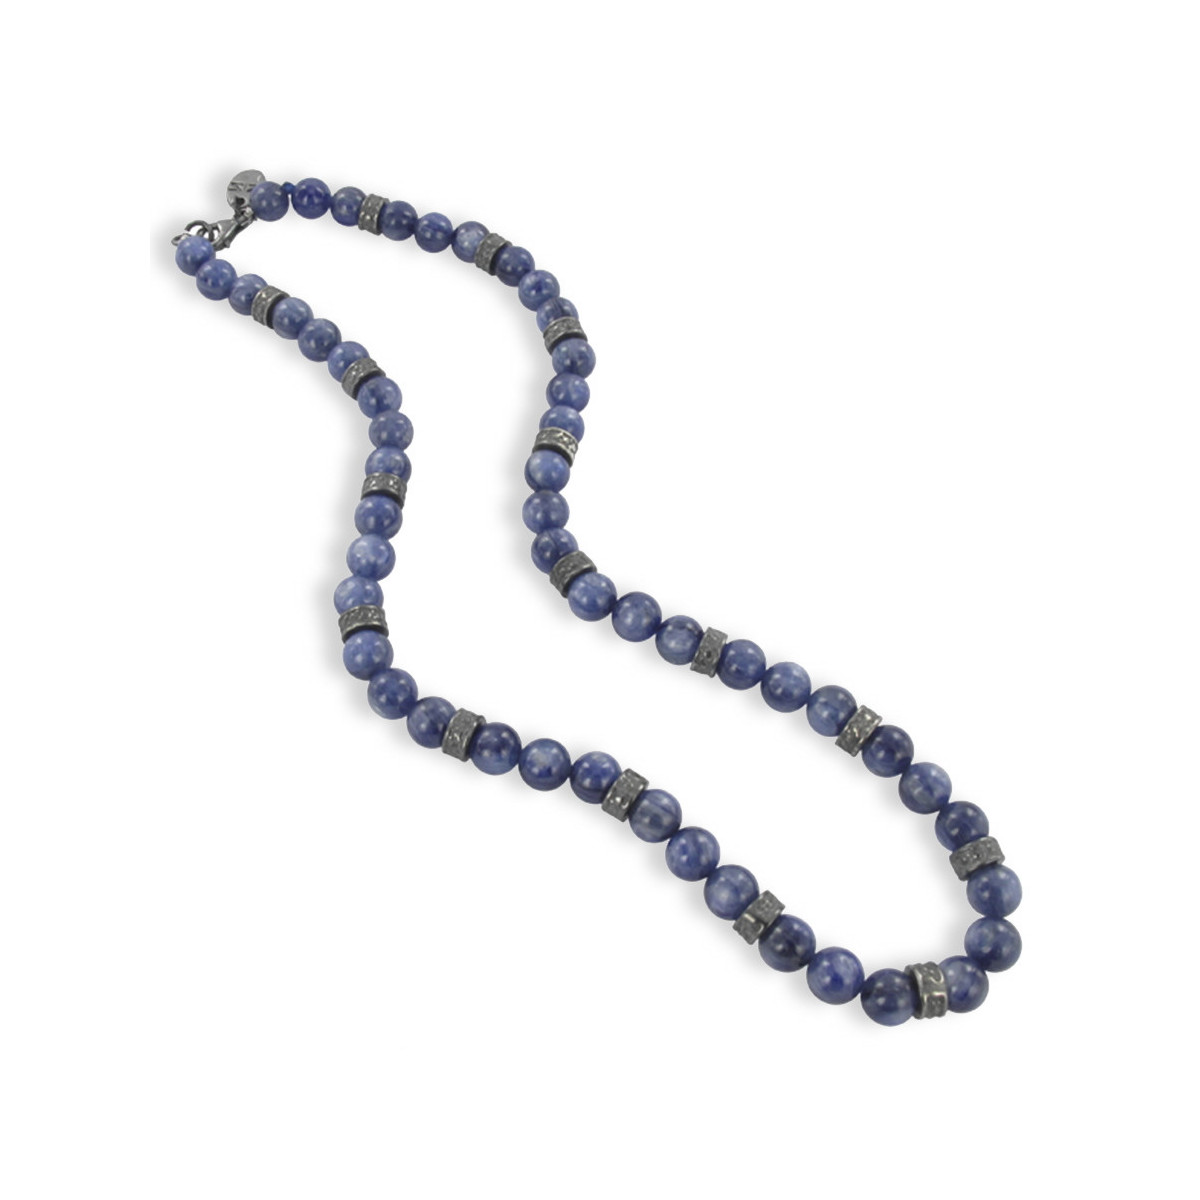 KYANITE AND SILVER NECKLACE